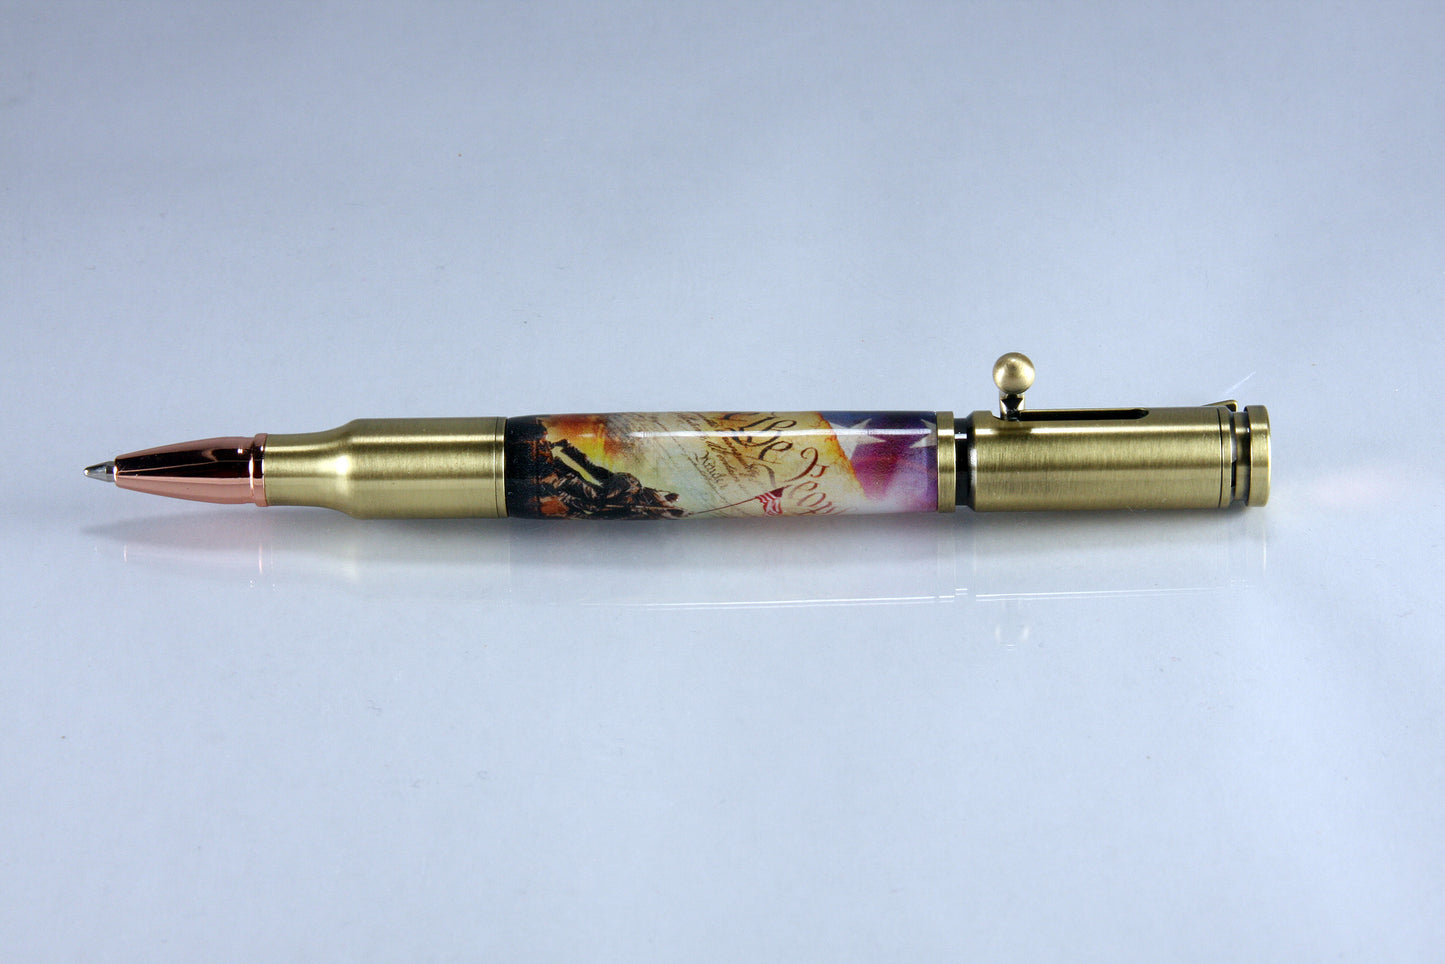 Wildflower Pens Bolt Action Pen – We The People Constitution Patriotic